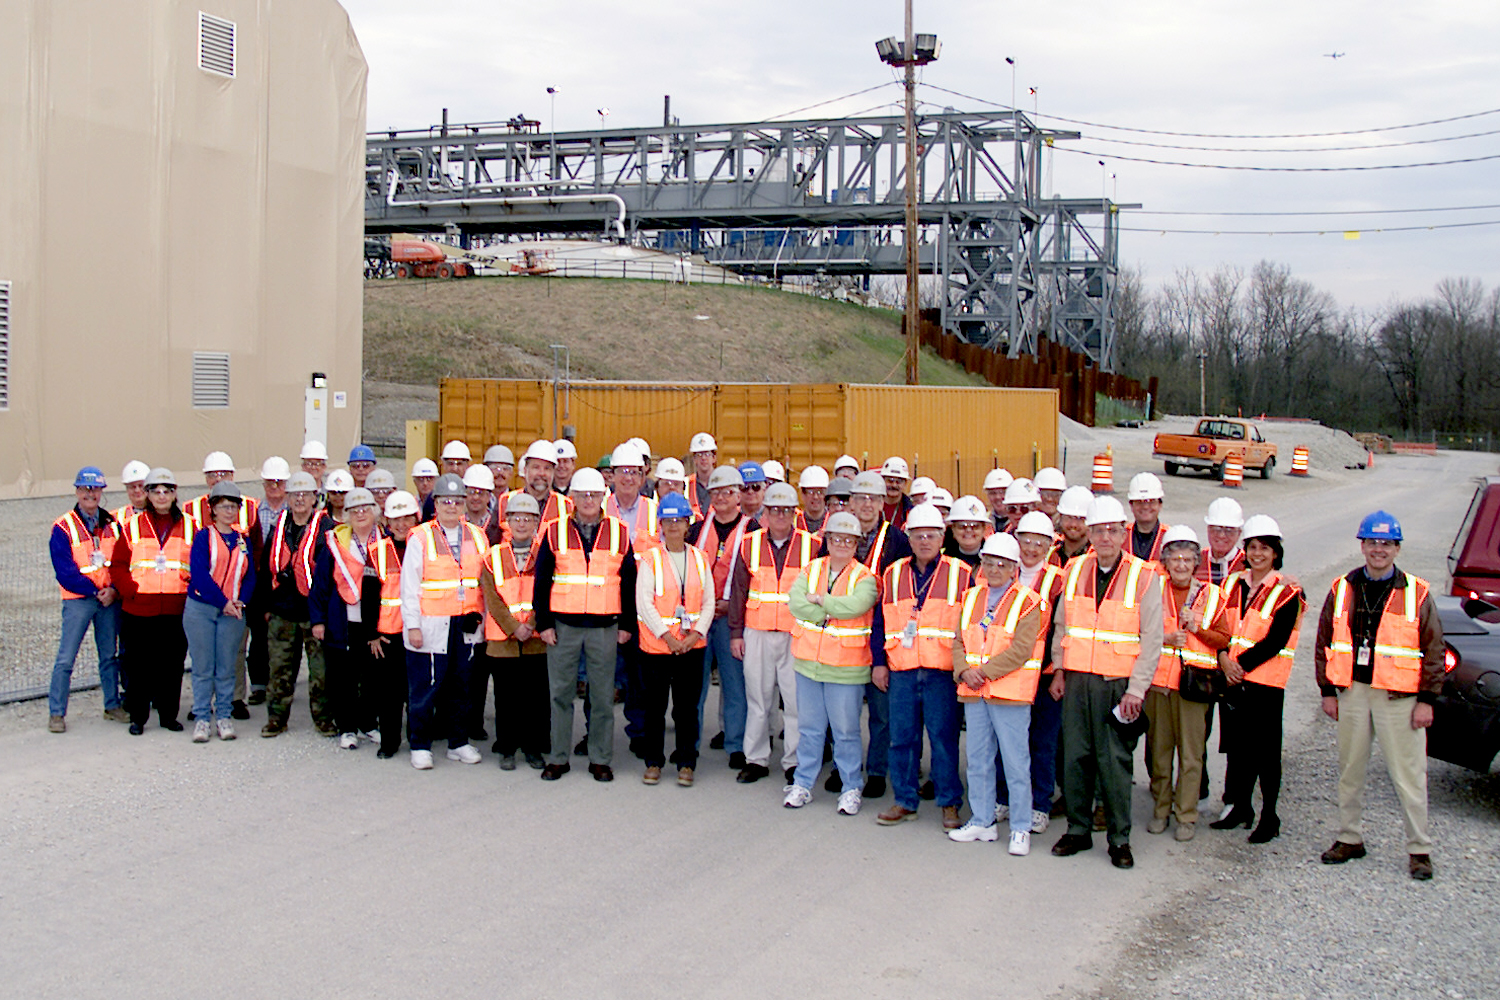 Public Tours
On Tuesday, April 6 about 60 Fernald stakeholders including members of the Fernald Citizens Advisory Board, Fernald Residents for Environmental Safety and Health (FRESH), and site neighbors attended a two-hour tour of Fernalds highest profile project. The Department of Energy and Fluor Fernald hosted the Silos tour   to give stakeholders a chance to see the extraction and treatment facilities up close, before operations begin later this month. Visitors got a chance to climb the walkway above the K-65 silos
Keywords: Fernald Closure Project Fernald Green Salt Plant, Feed Materials Production Center, Fernald, Ohio (FEMP)